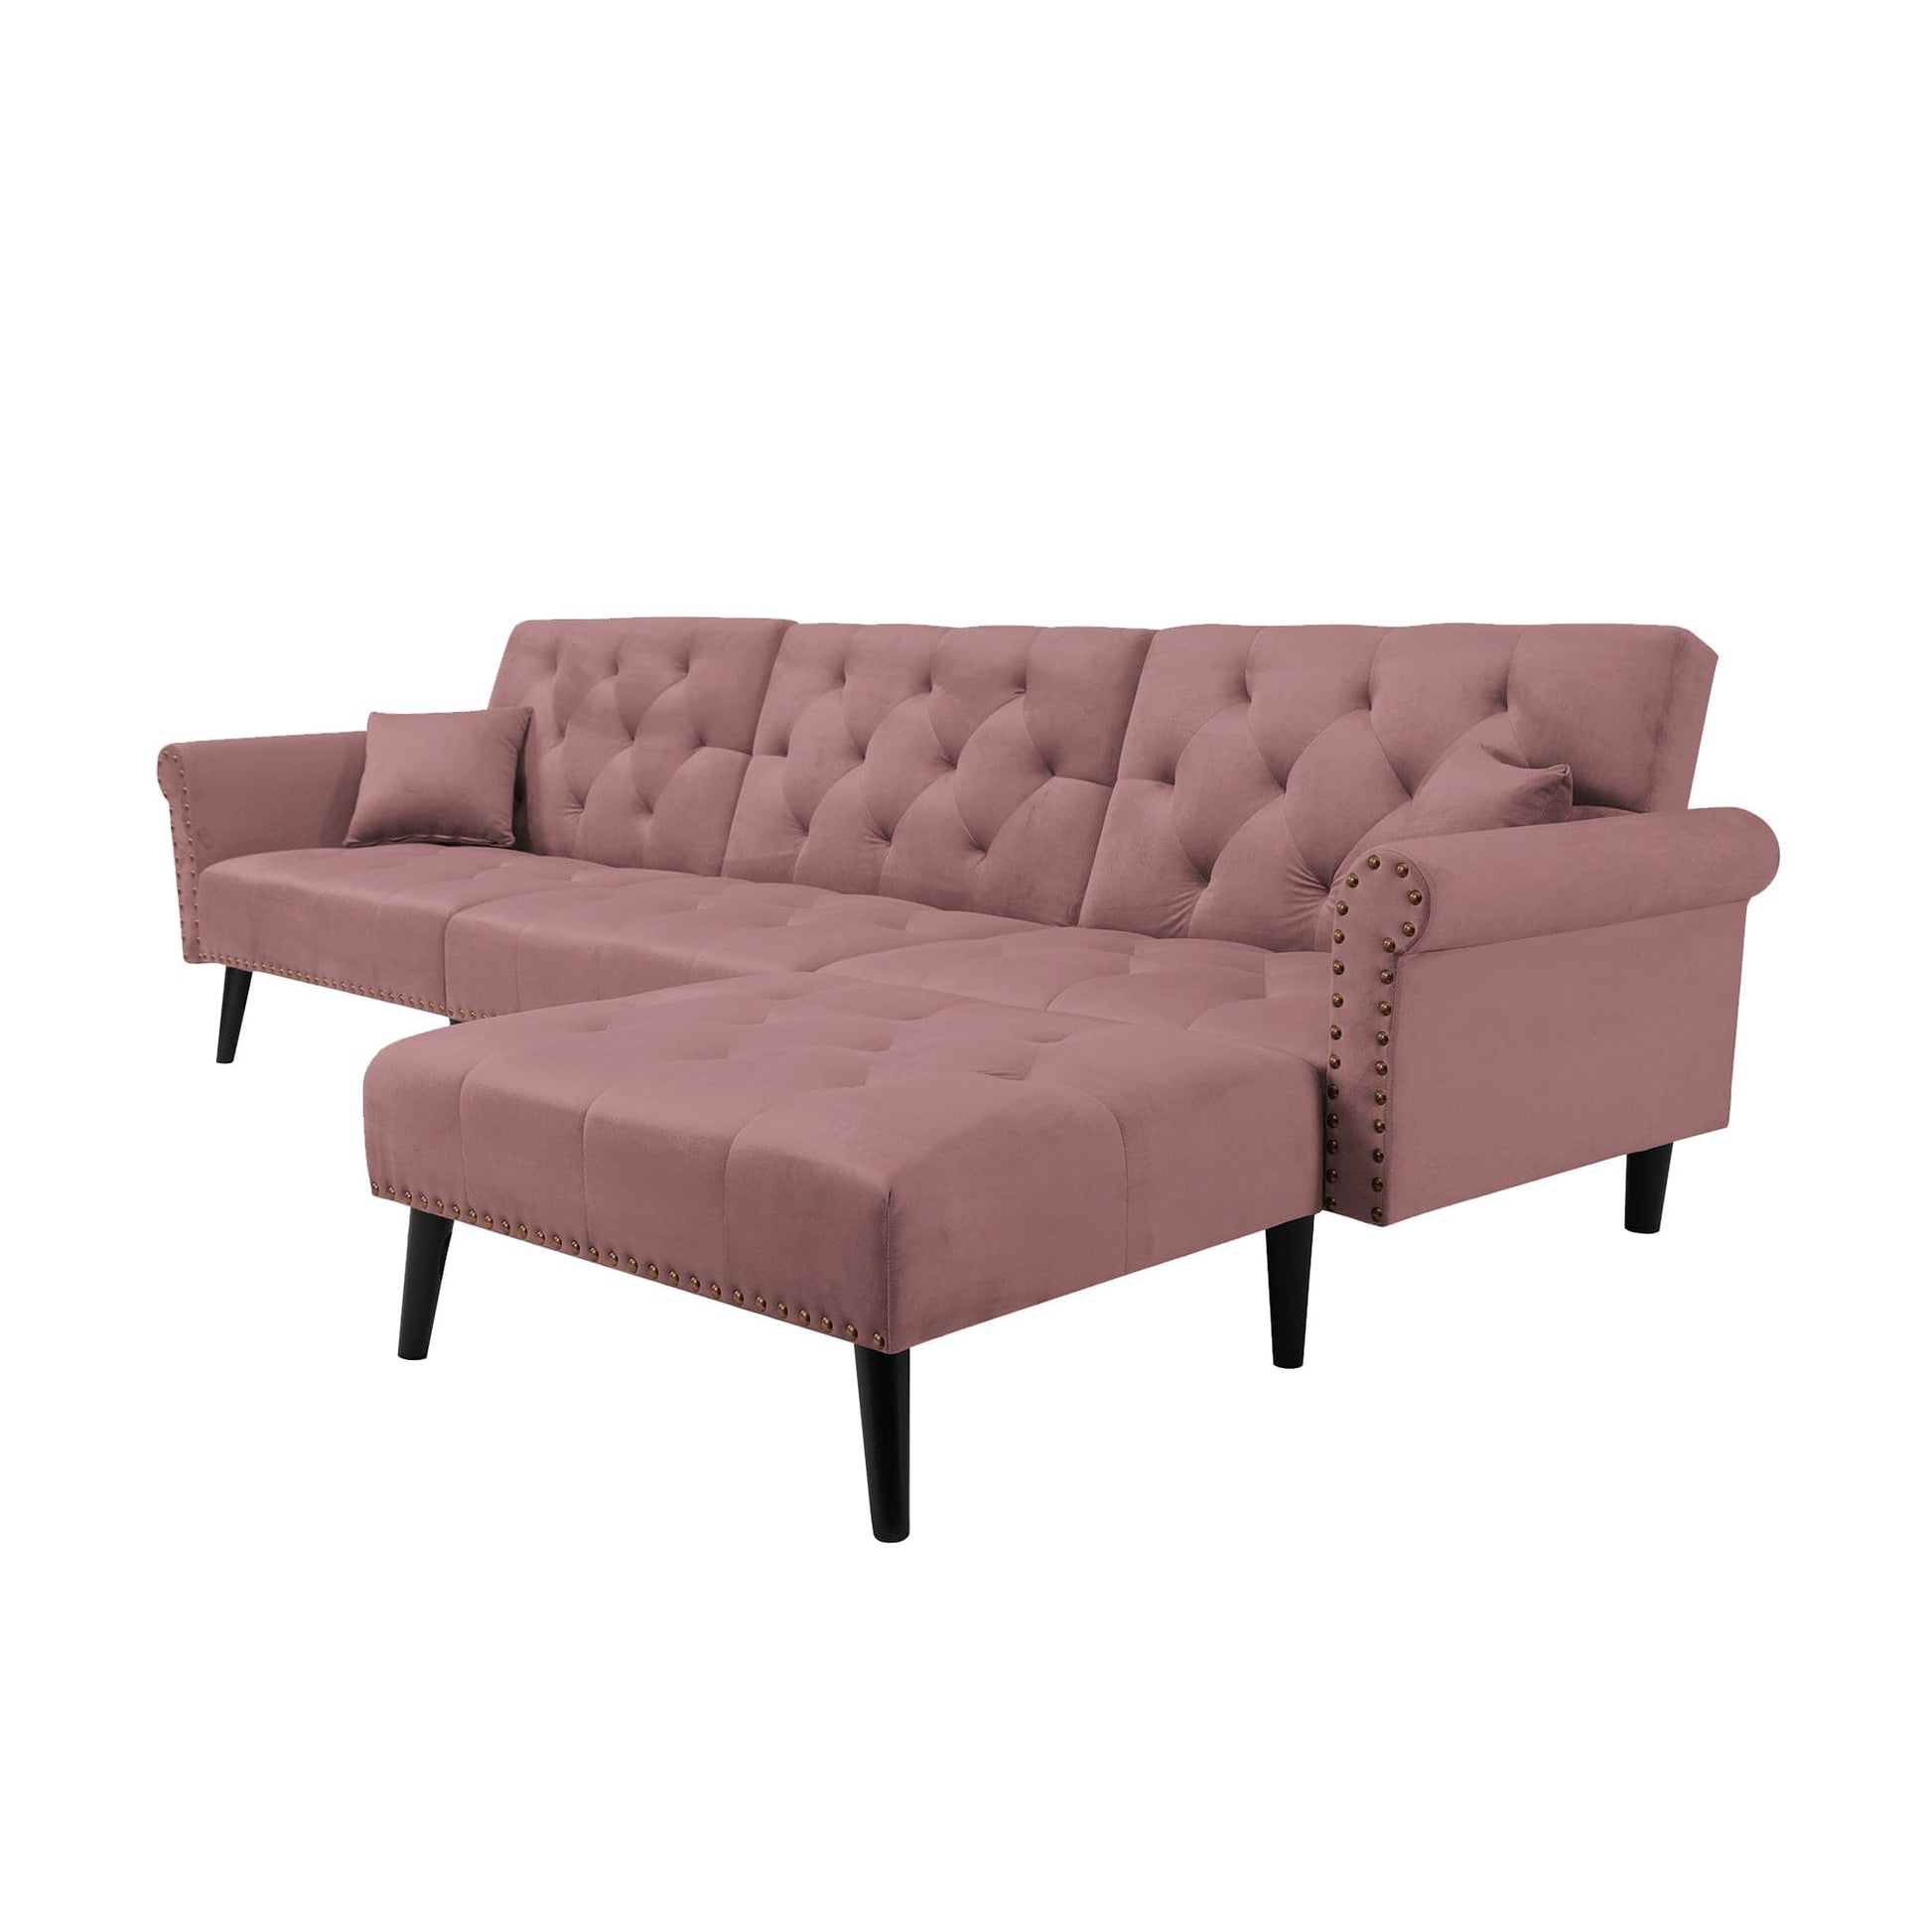 TFC&H Co. Convertible Sofa Bed Sleeper - Velvet Mauve/Pink- Ships from The US - sofa bed sleeper at TFC&H Co.